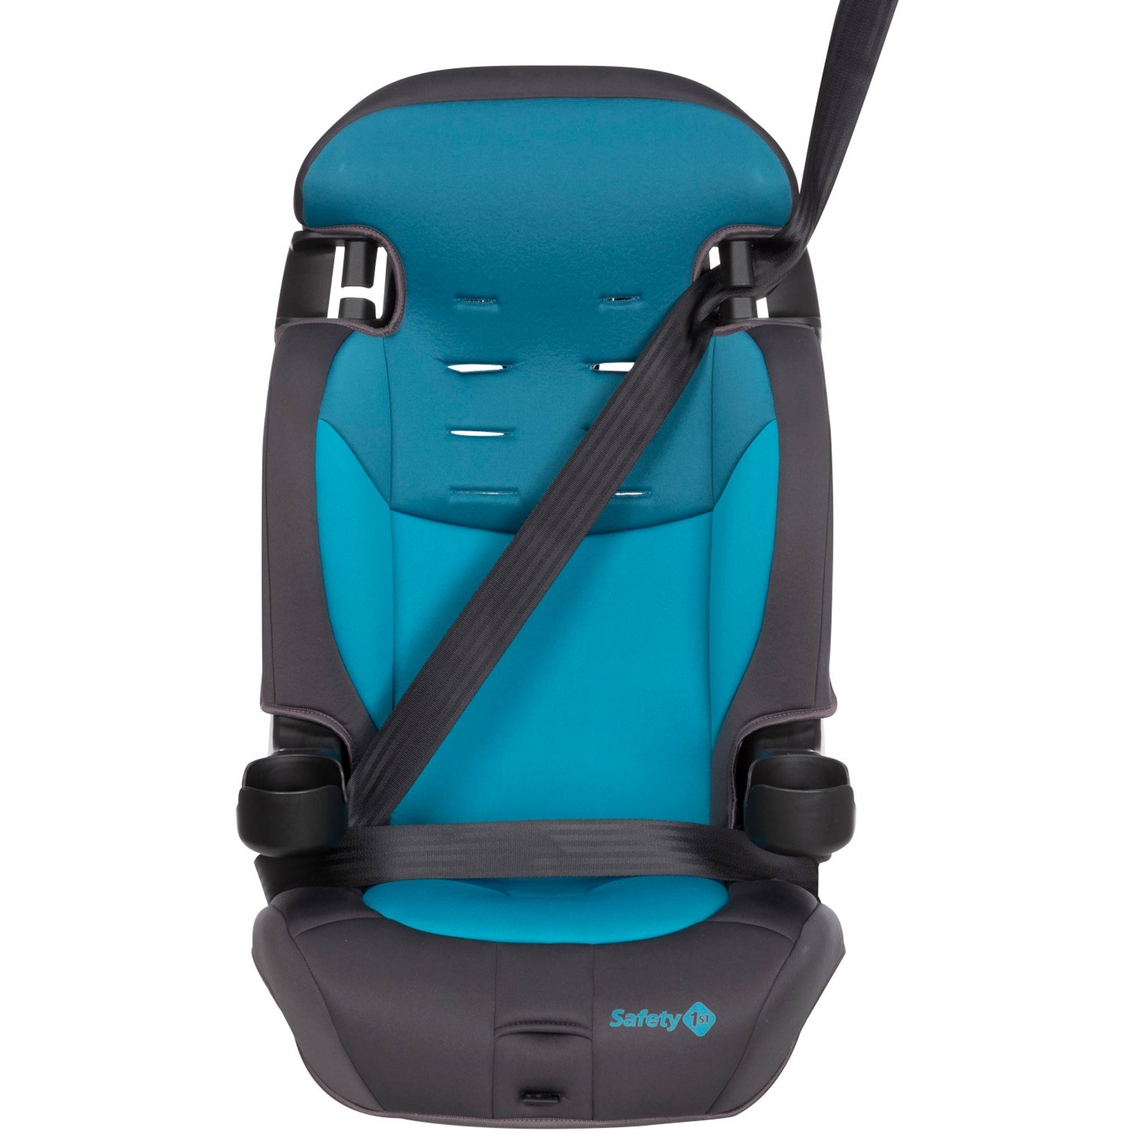 Safety 1st Grand 2 in 1 Booster Car Seat - Image 4 of 9